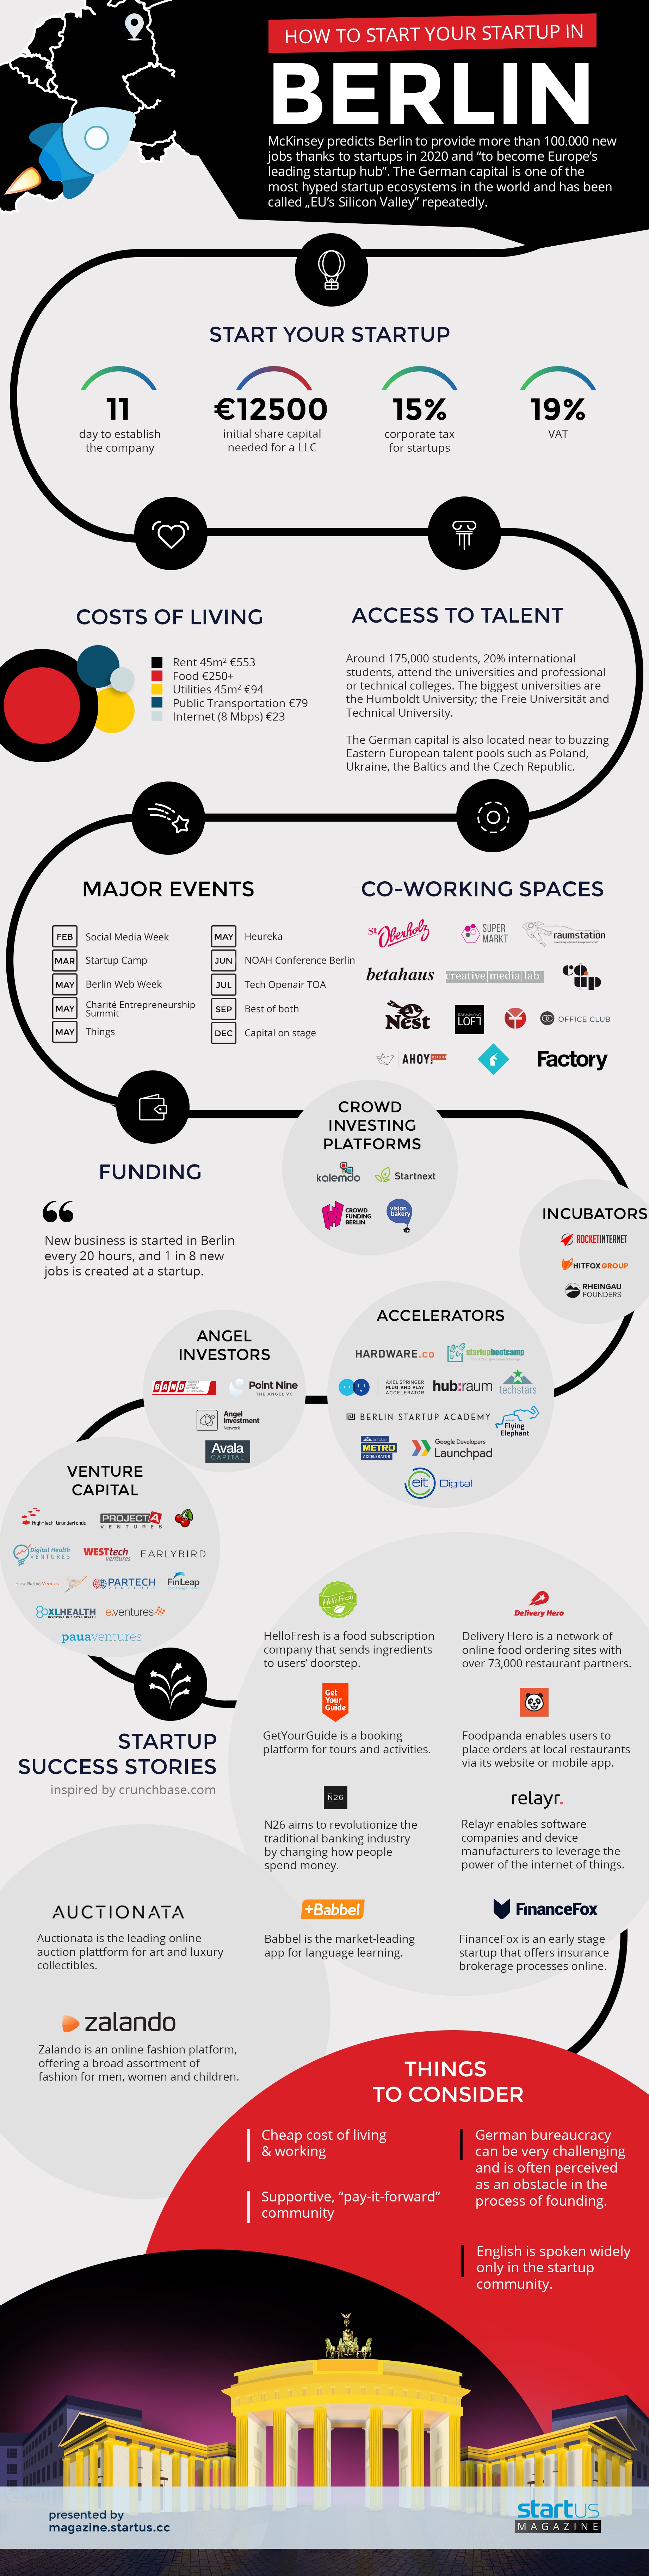 Infographic: How To Start Your Startup In Berlin